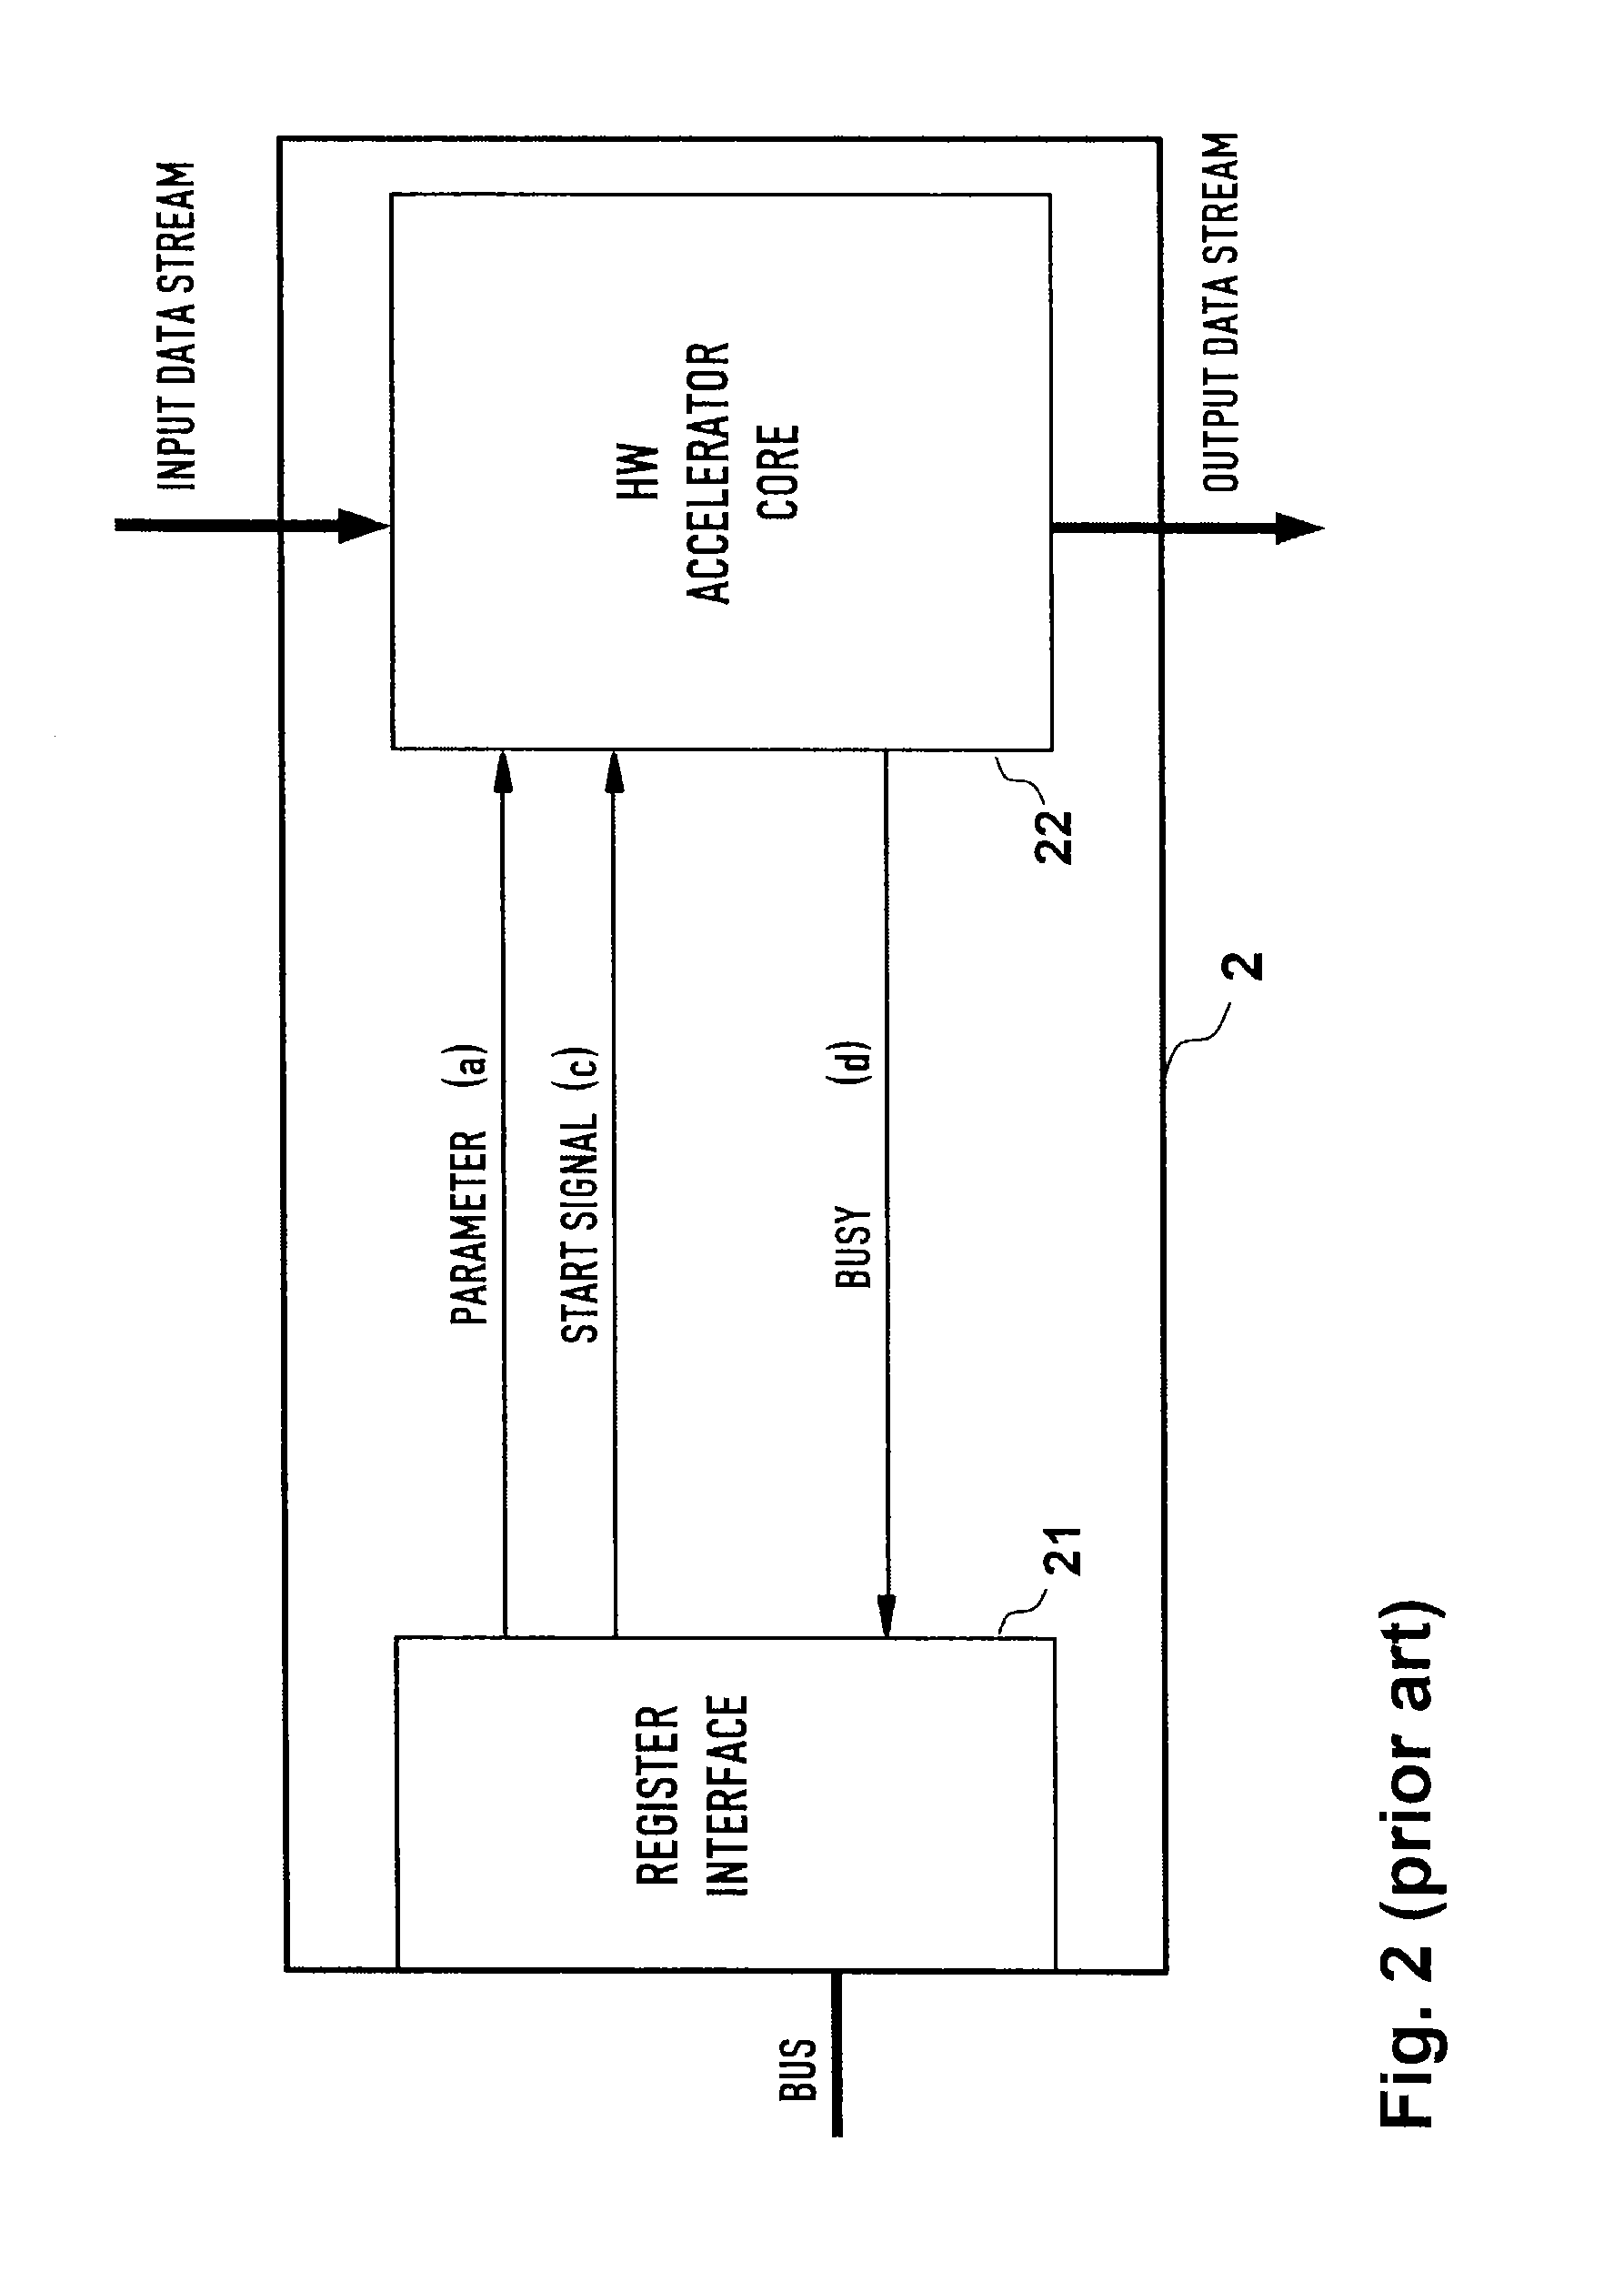 Hardware accelerator module and method for setting up same